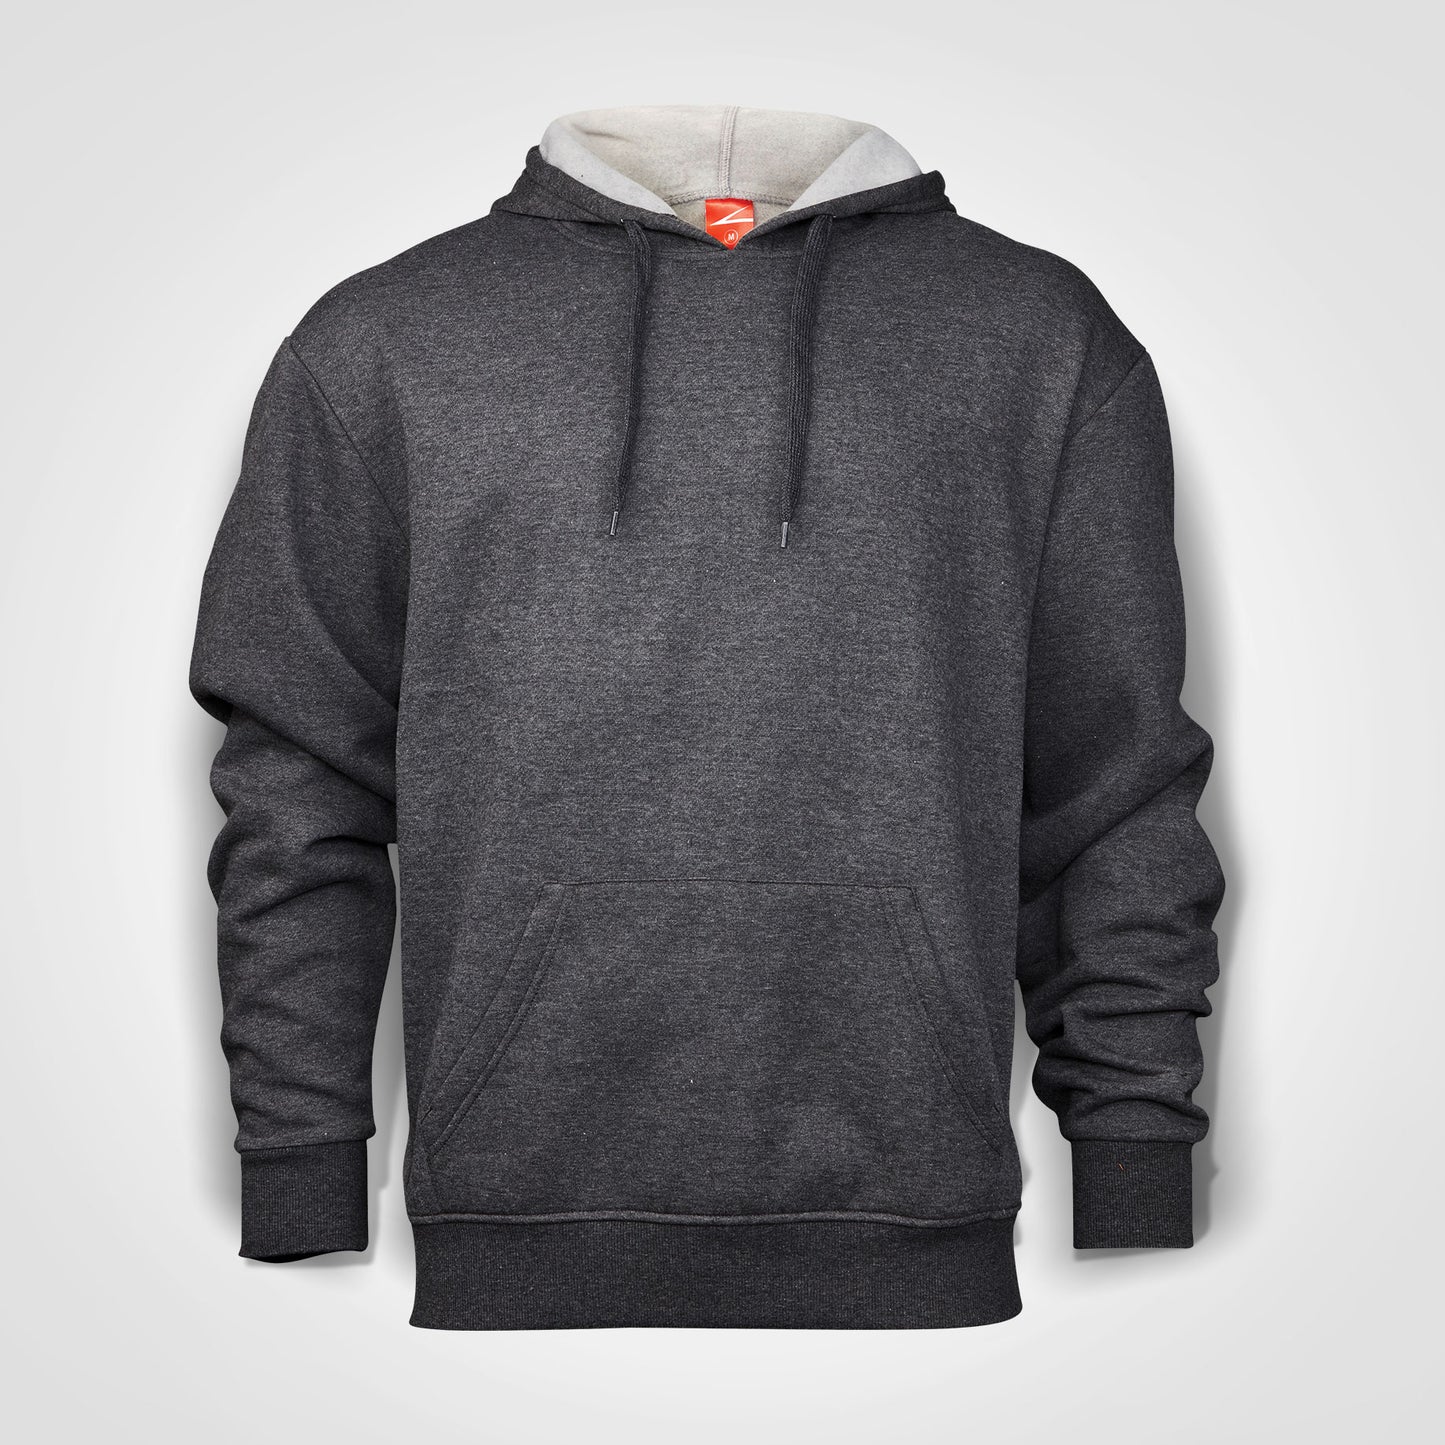 Hoodie - Personalized